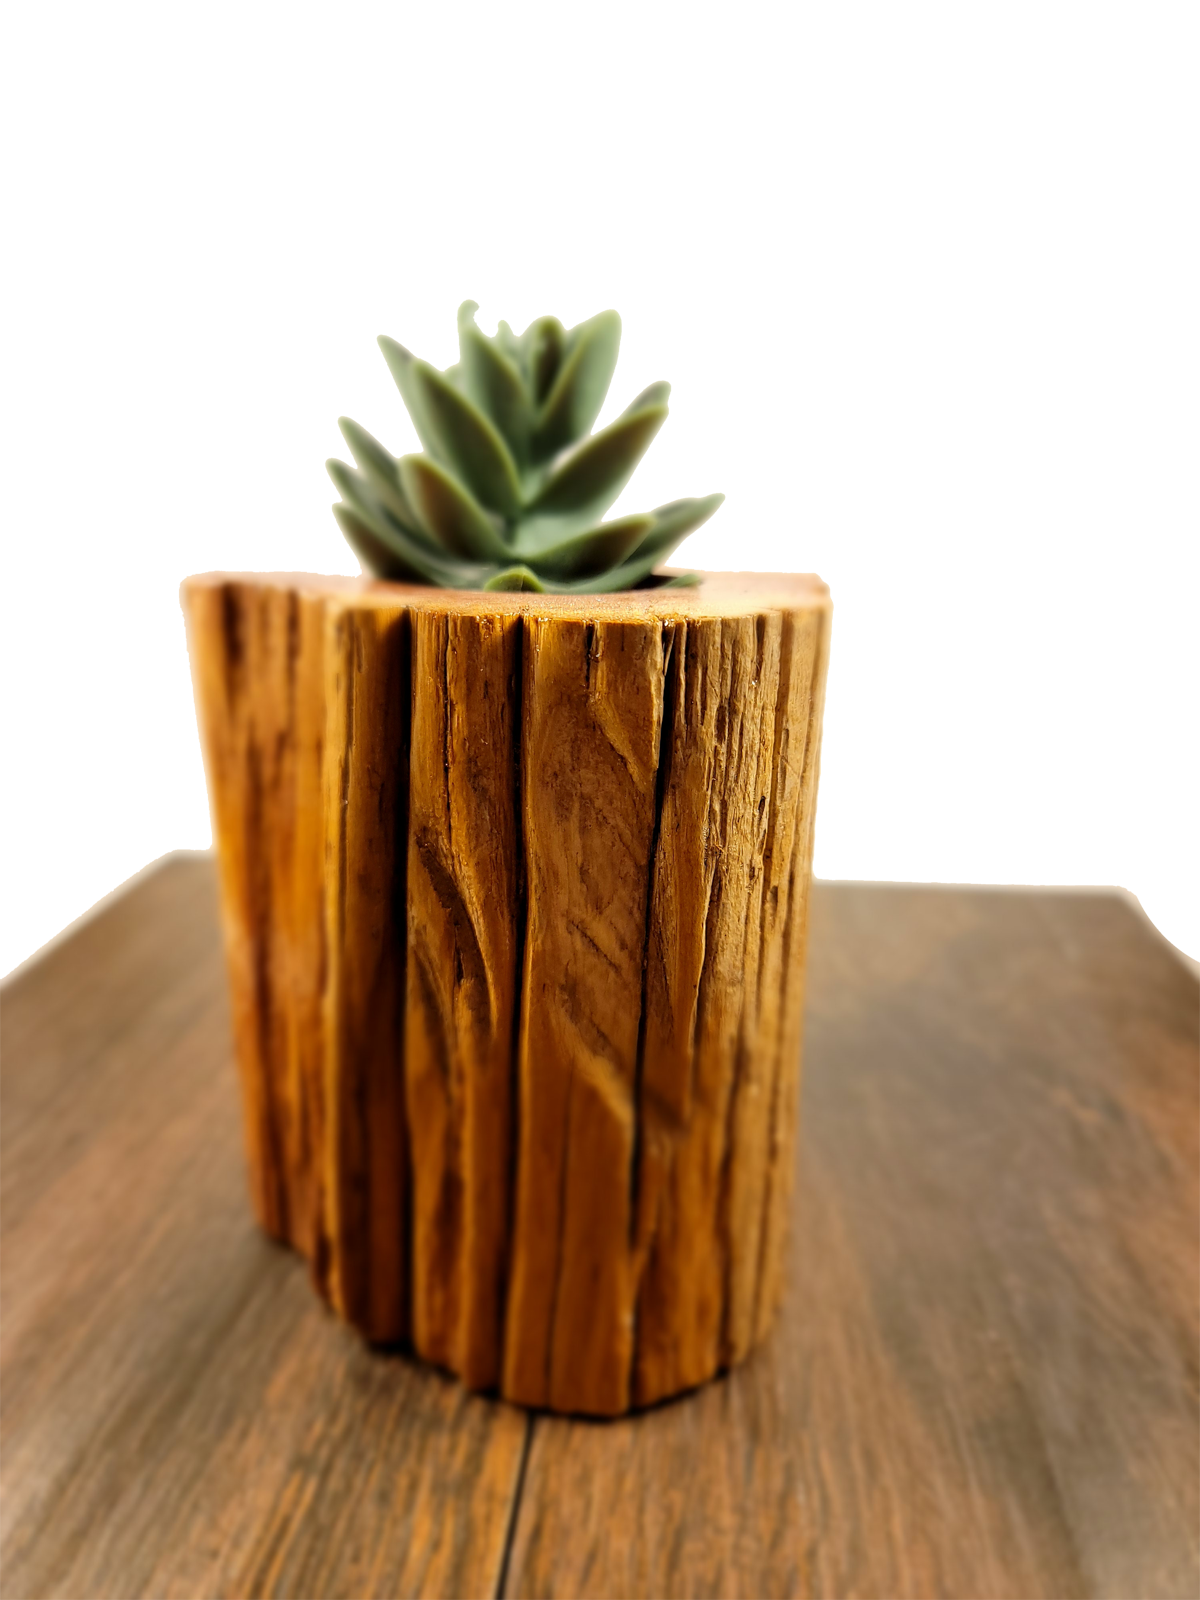 Handmade Planter Made From Stunning Cedar with Unique Knot Detail, Woodbase